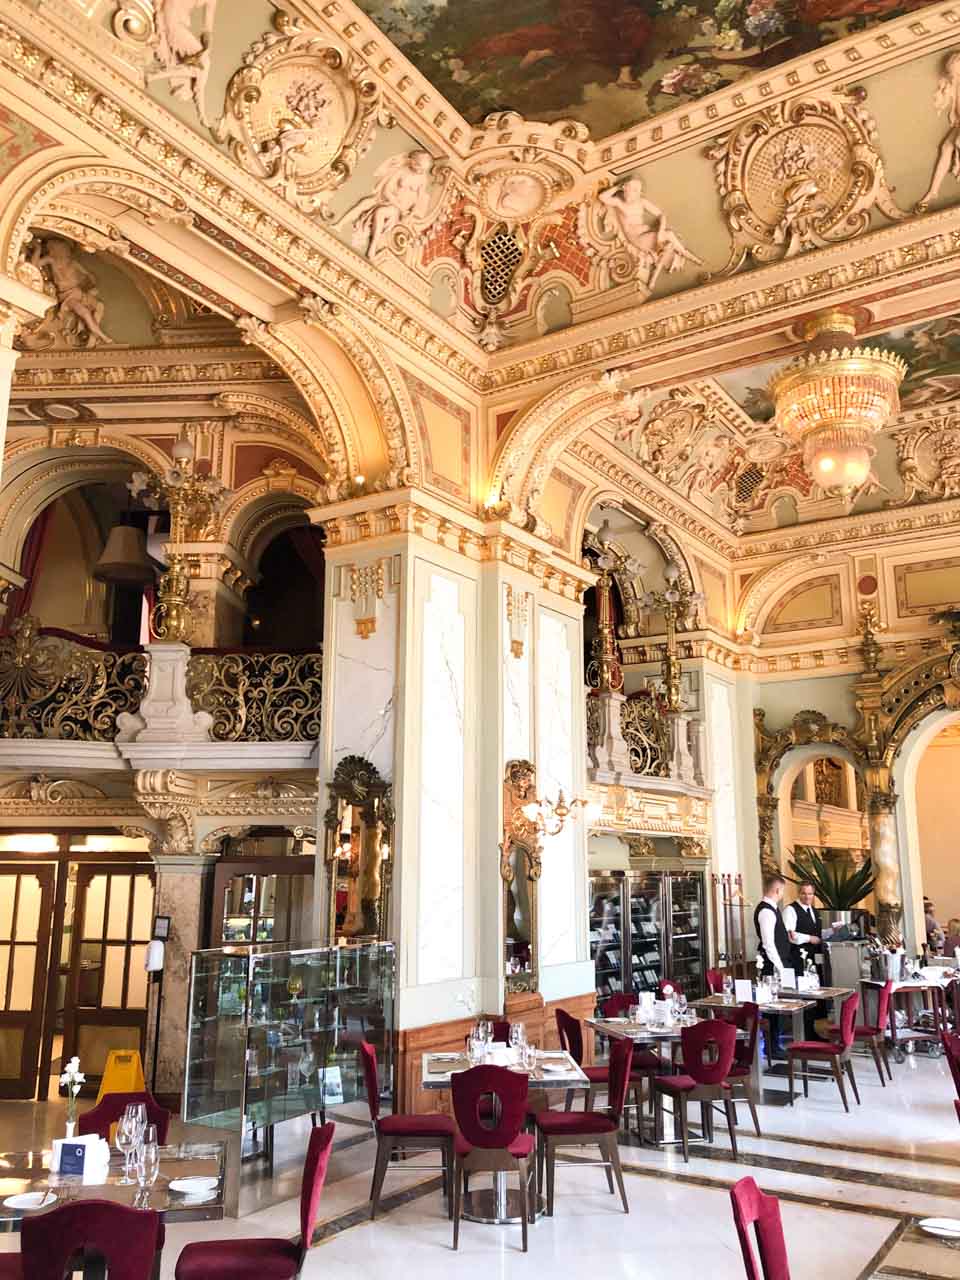 The most beautiful café in the world - the New York Café in Budapest, Hungary